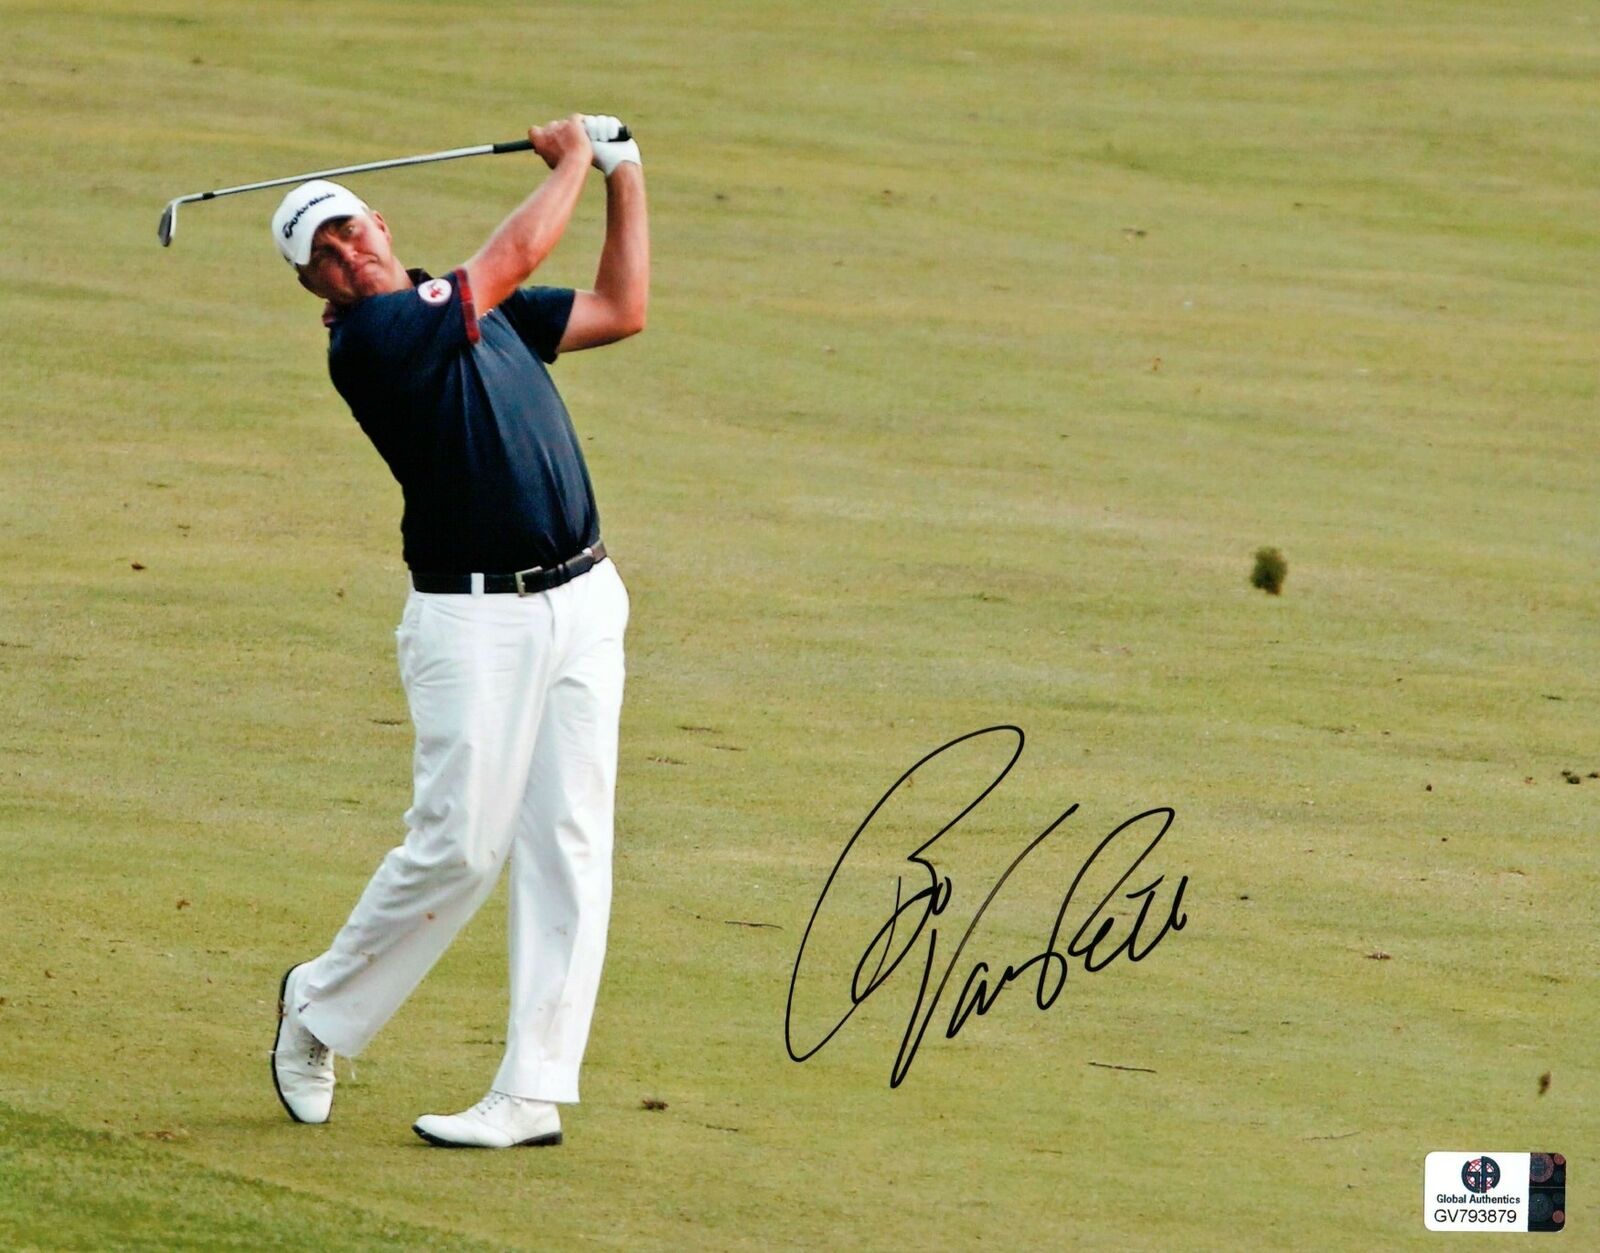 Bo Van Pelt Signed Autographed 8X10 Photo Poster painting PGA Golfer Pose After Swing GV793879